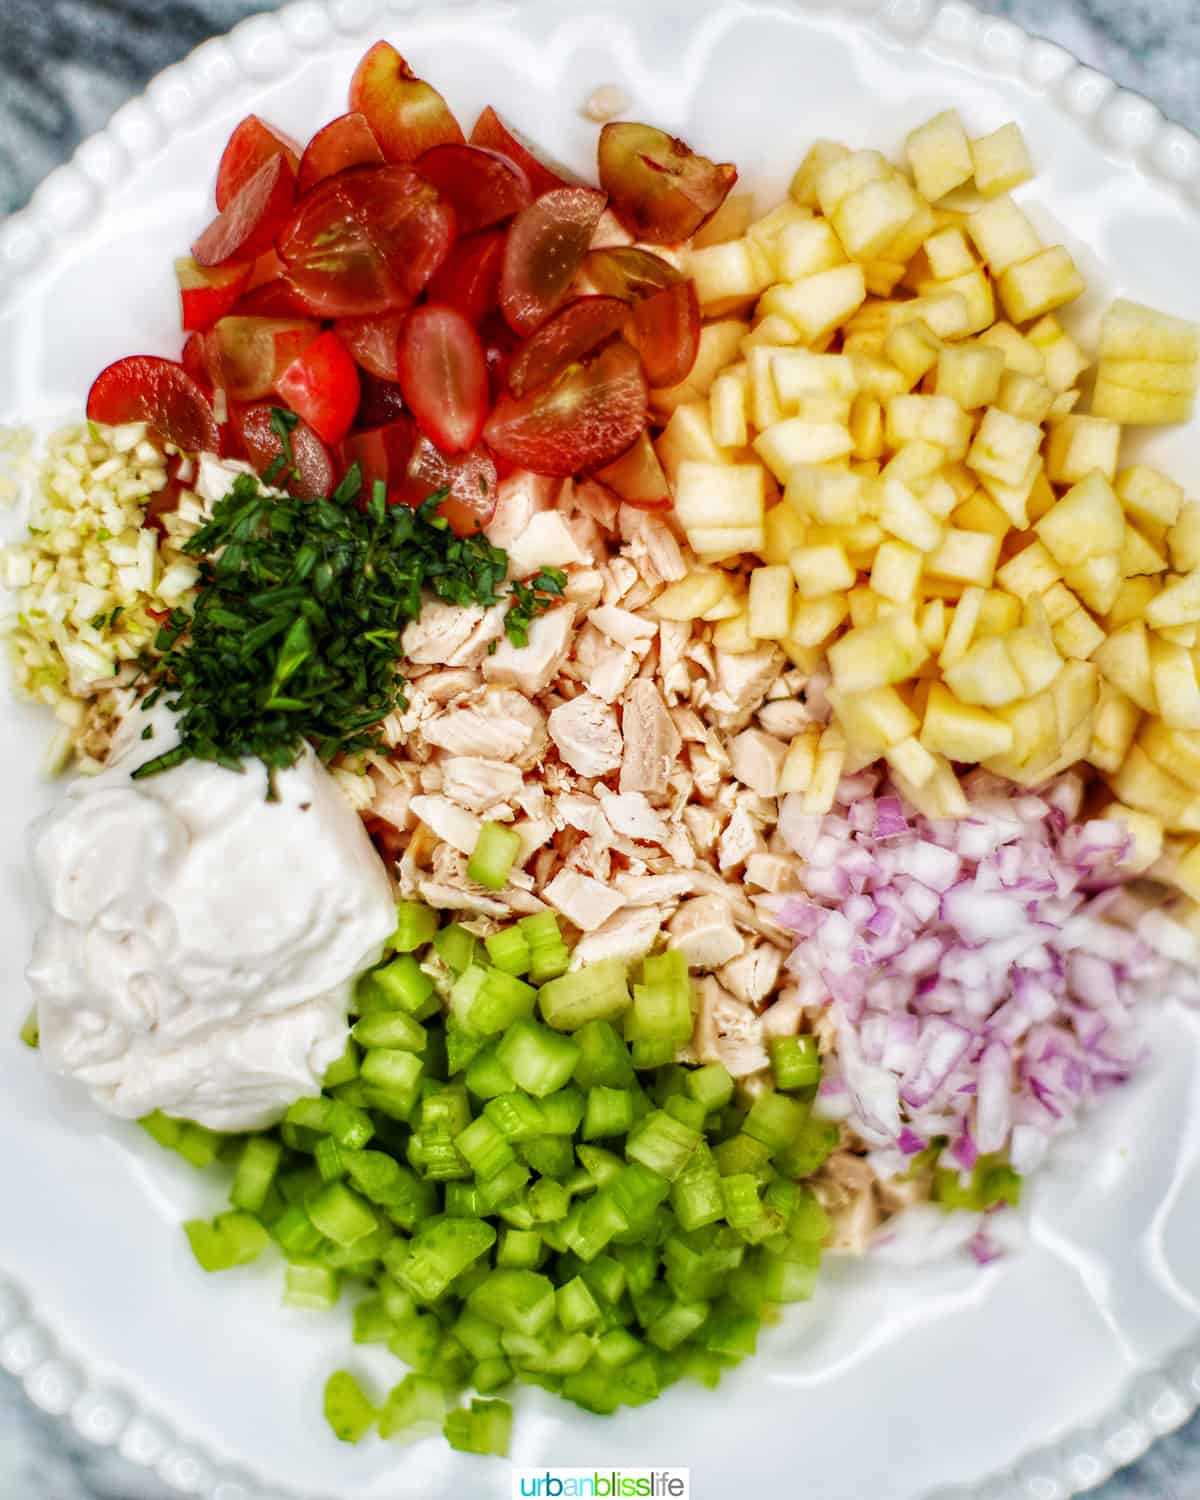 bowl of ingredients for chicken salad sandwiches